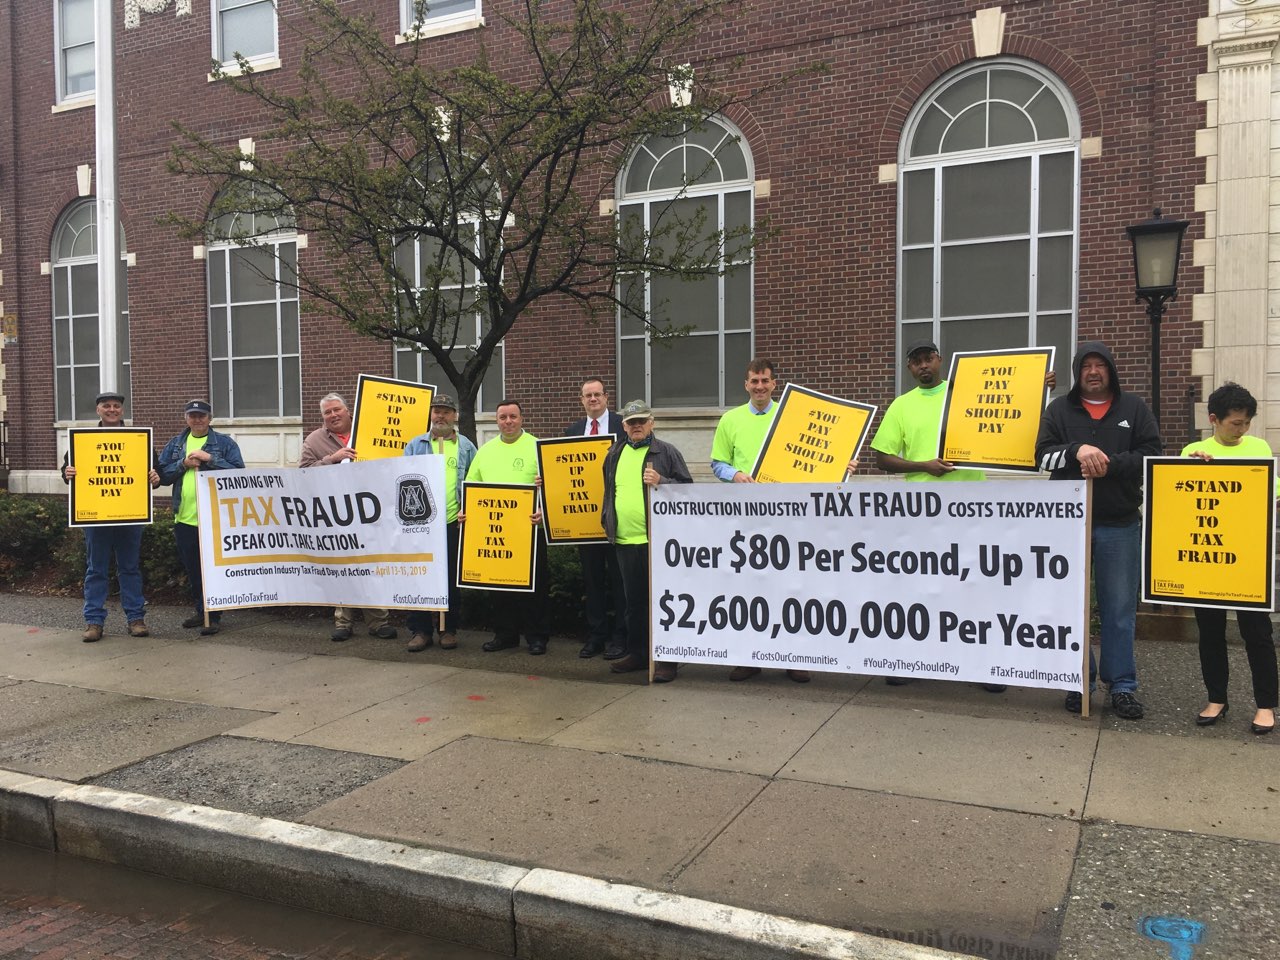 Assemblyman Karl Brabenec (R,C,I-Deerpark) [fifth from left] joins local officials and labor leaders for a rally to prevent wage theft and tax fraud in front of the Newburgh Post Office on Monday, Apr